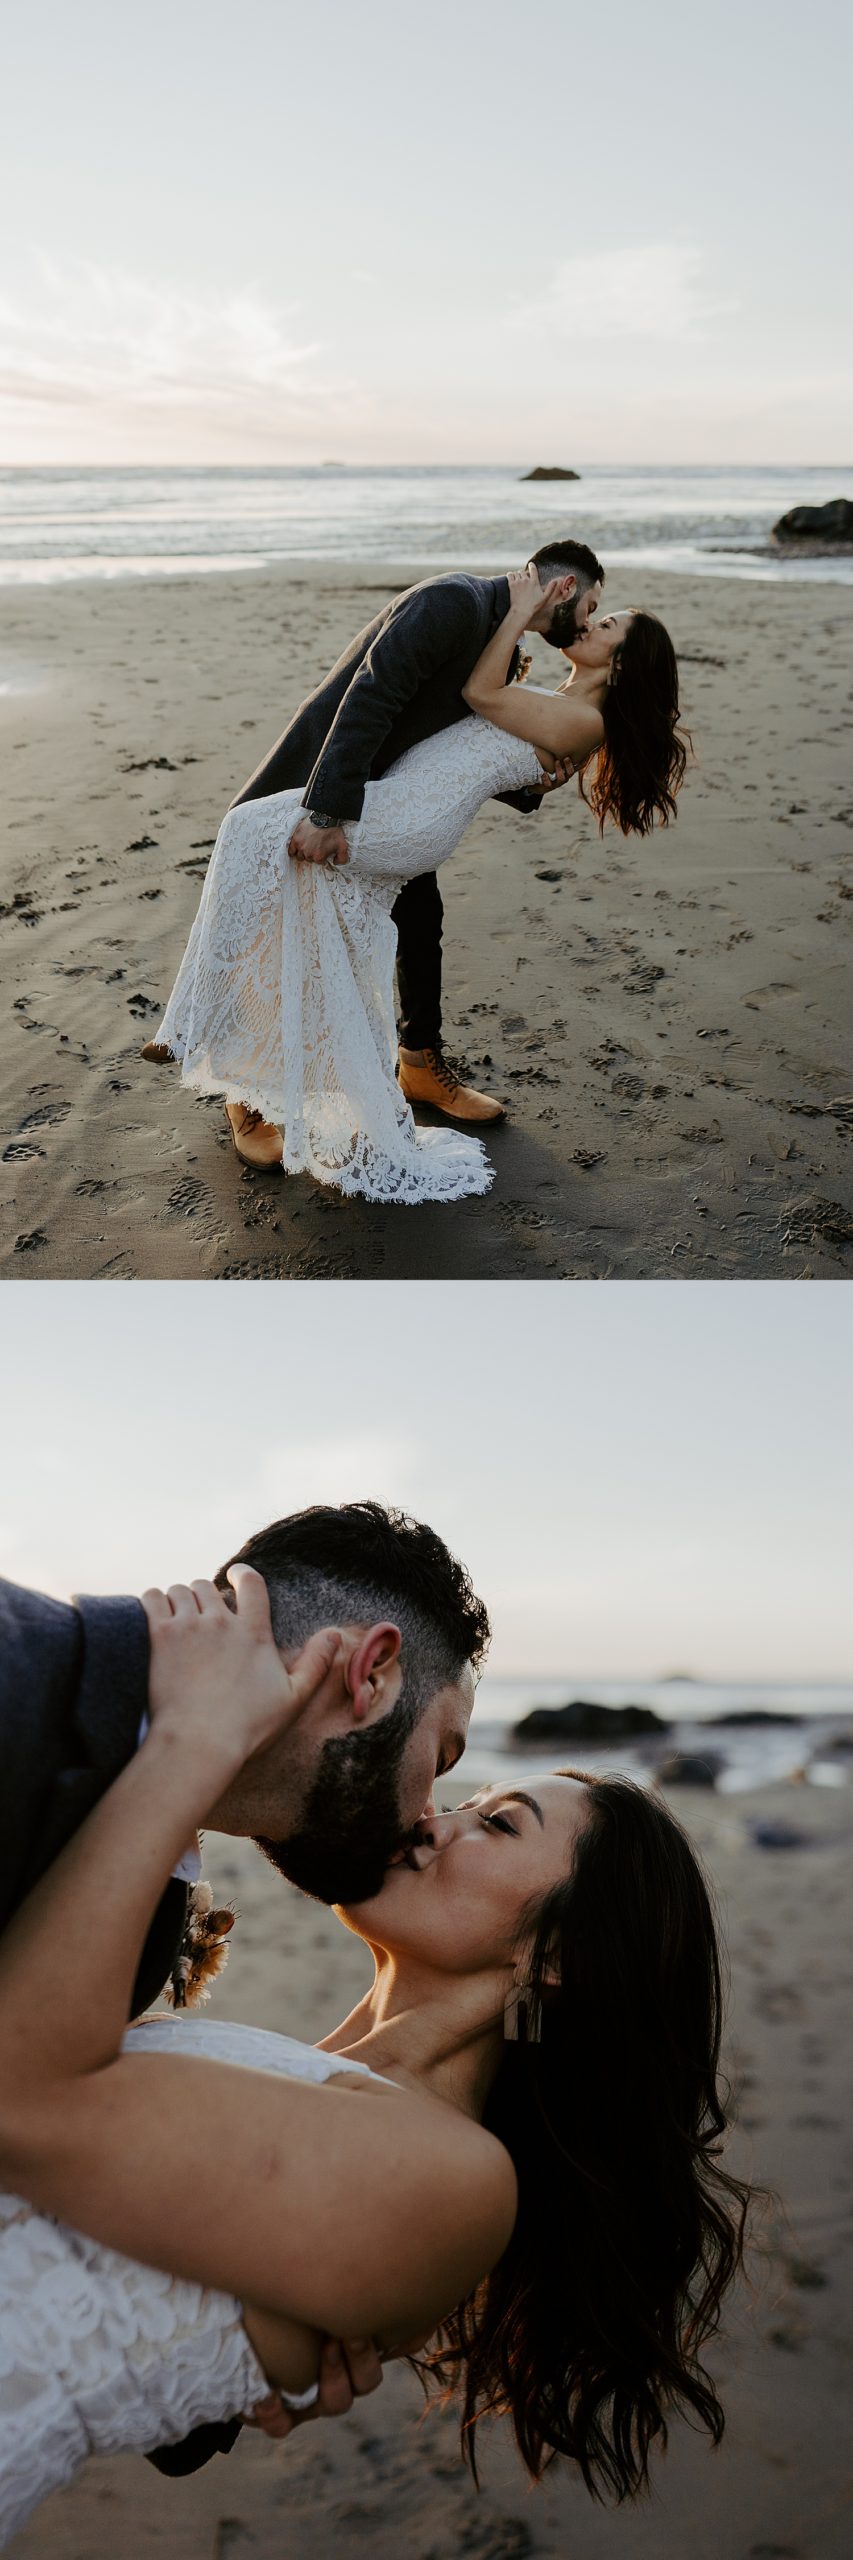 eloping couple kiss dipping on a sandy beach at sunset in washington